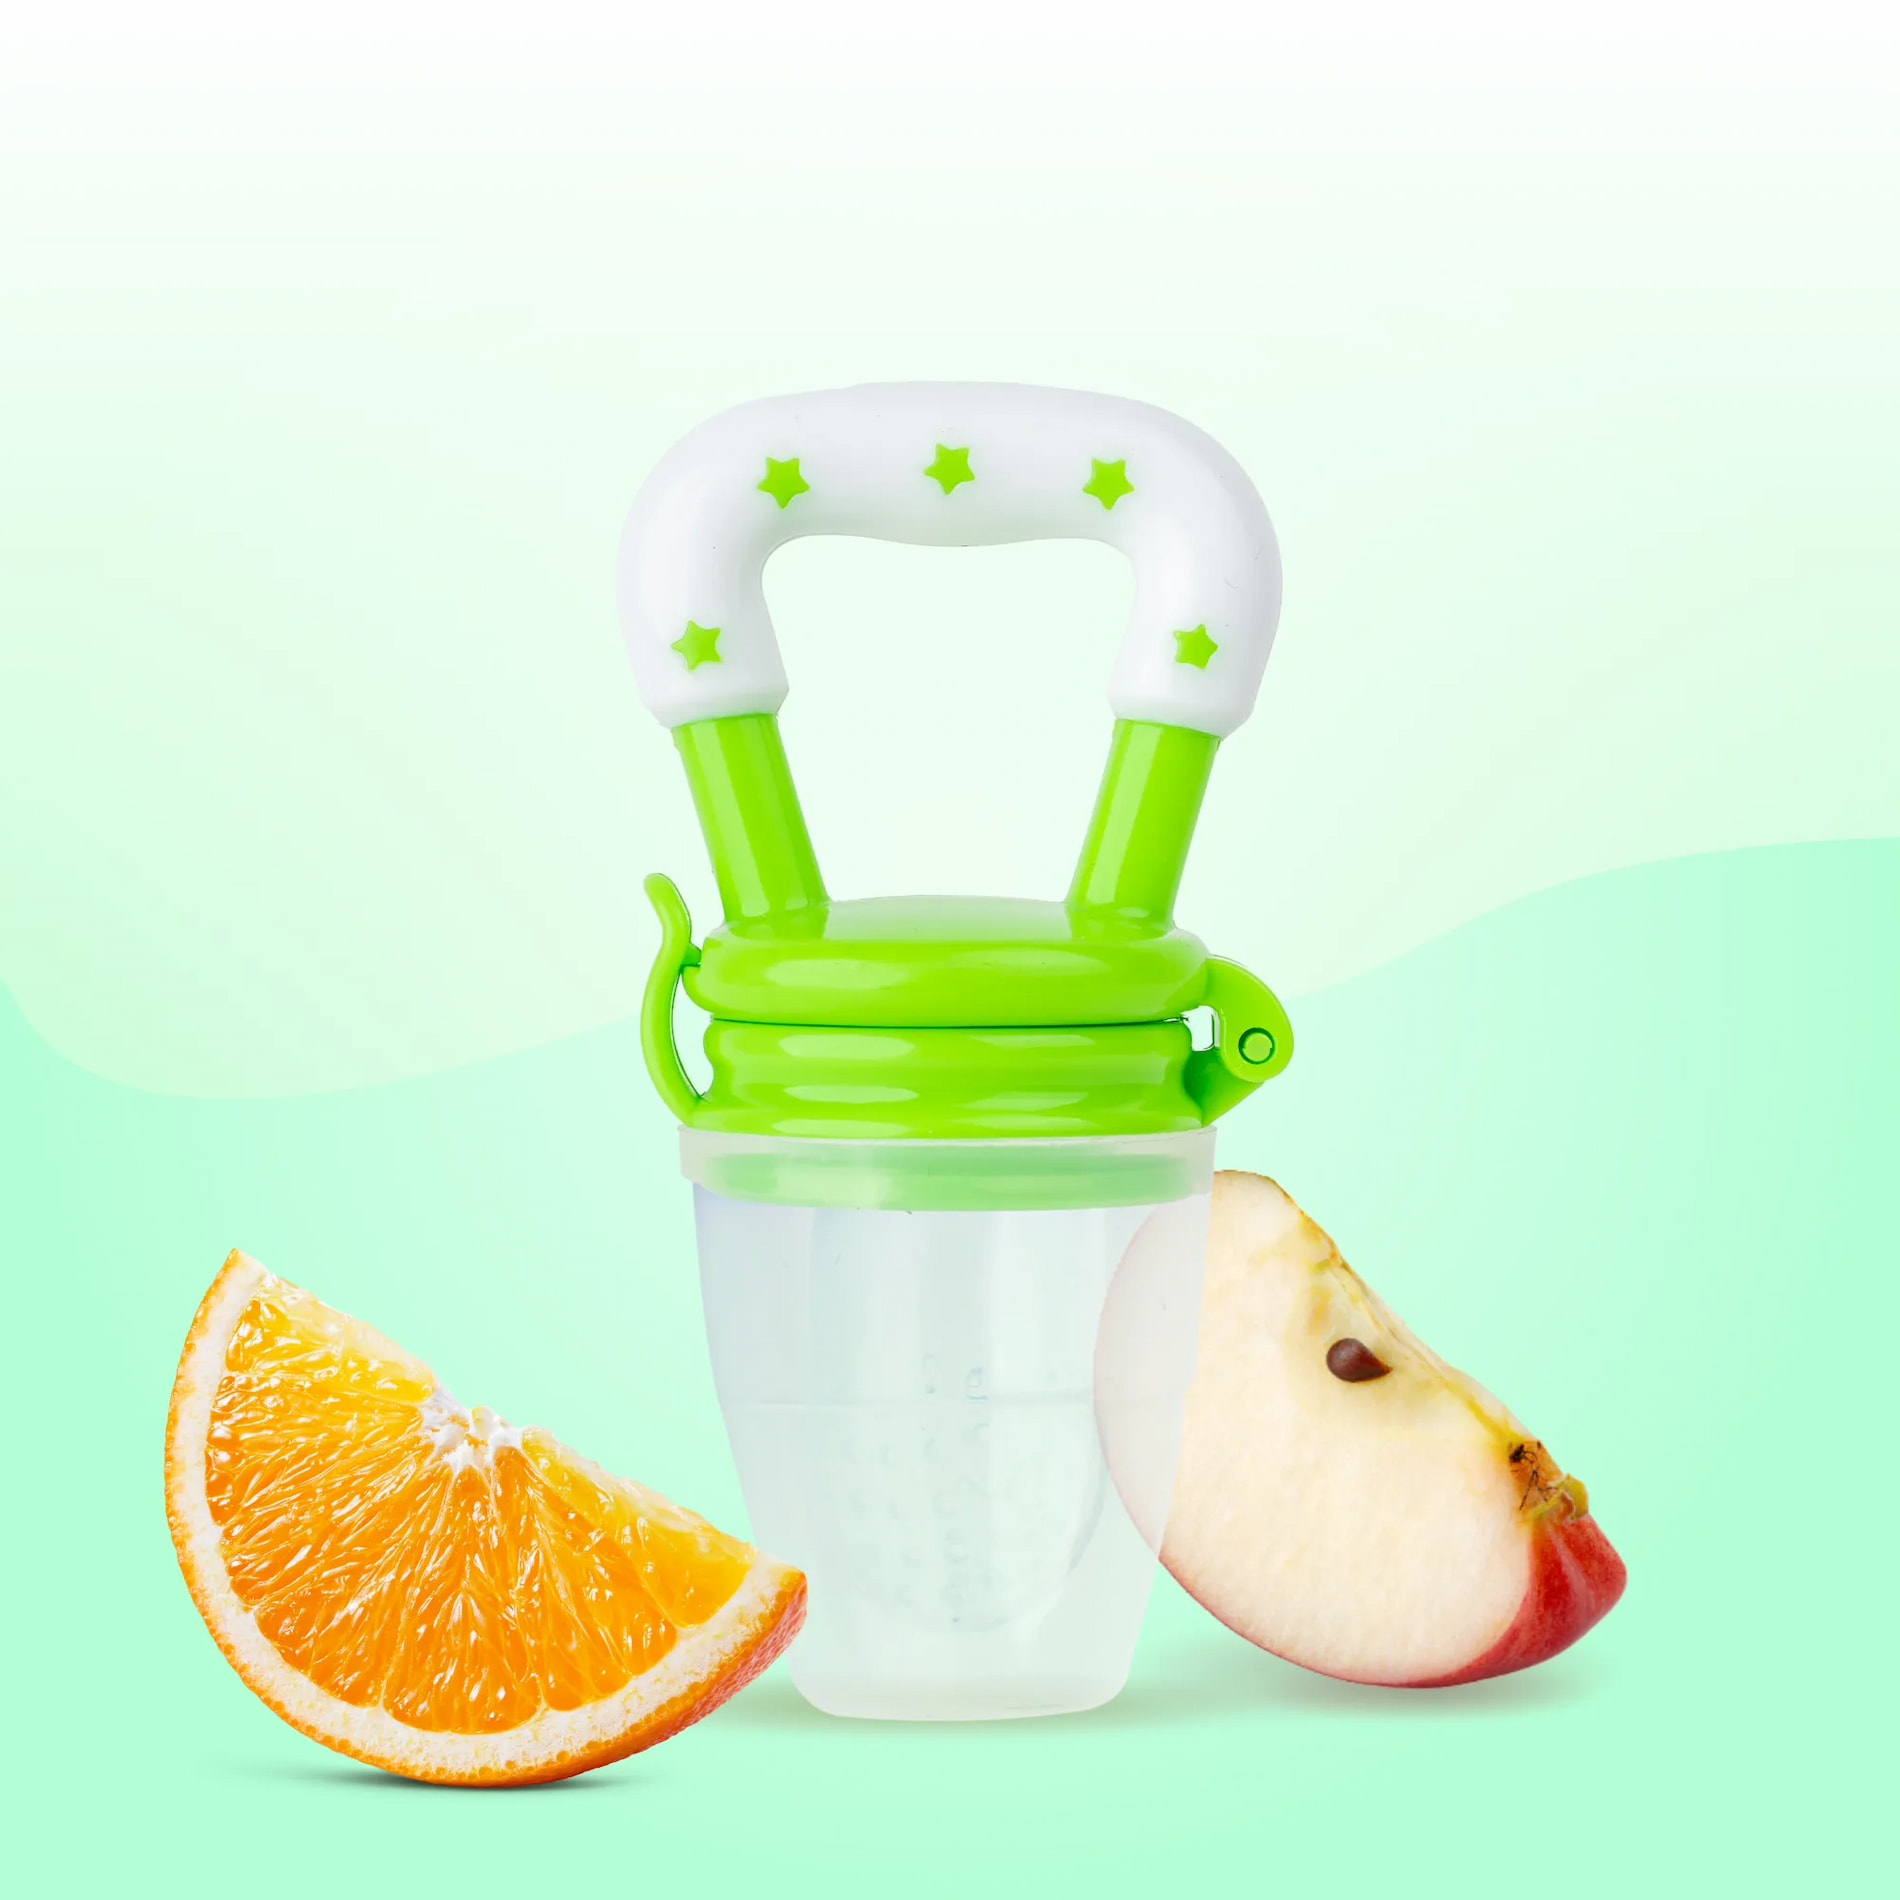 Feels Natural Ultra Soft Fruit & Food Nibbler- Green | Convenient to Introduce Fruits & Veggies to Baby | Ultra-soft Silicone Mesh for Easy Chewing | Easy One Snap Filling | Helps Relieve Teething Discomfort